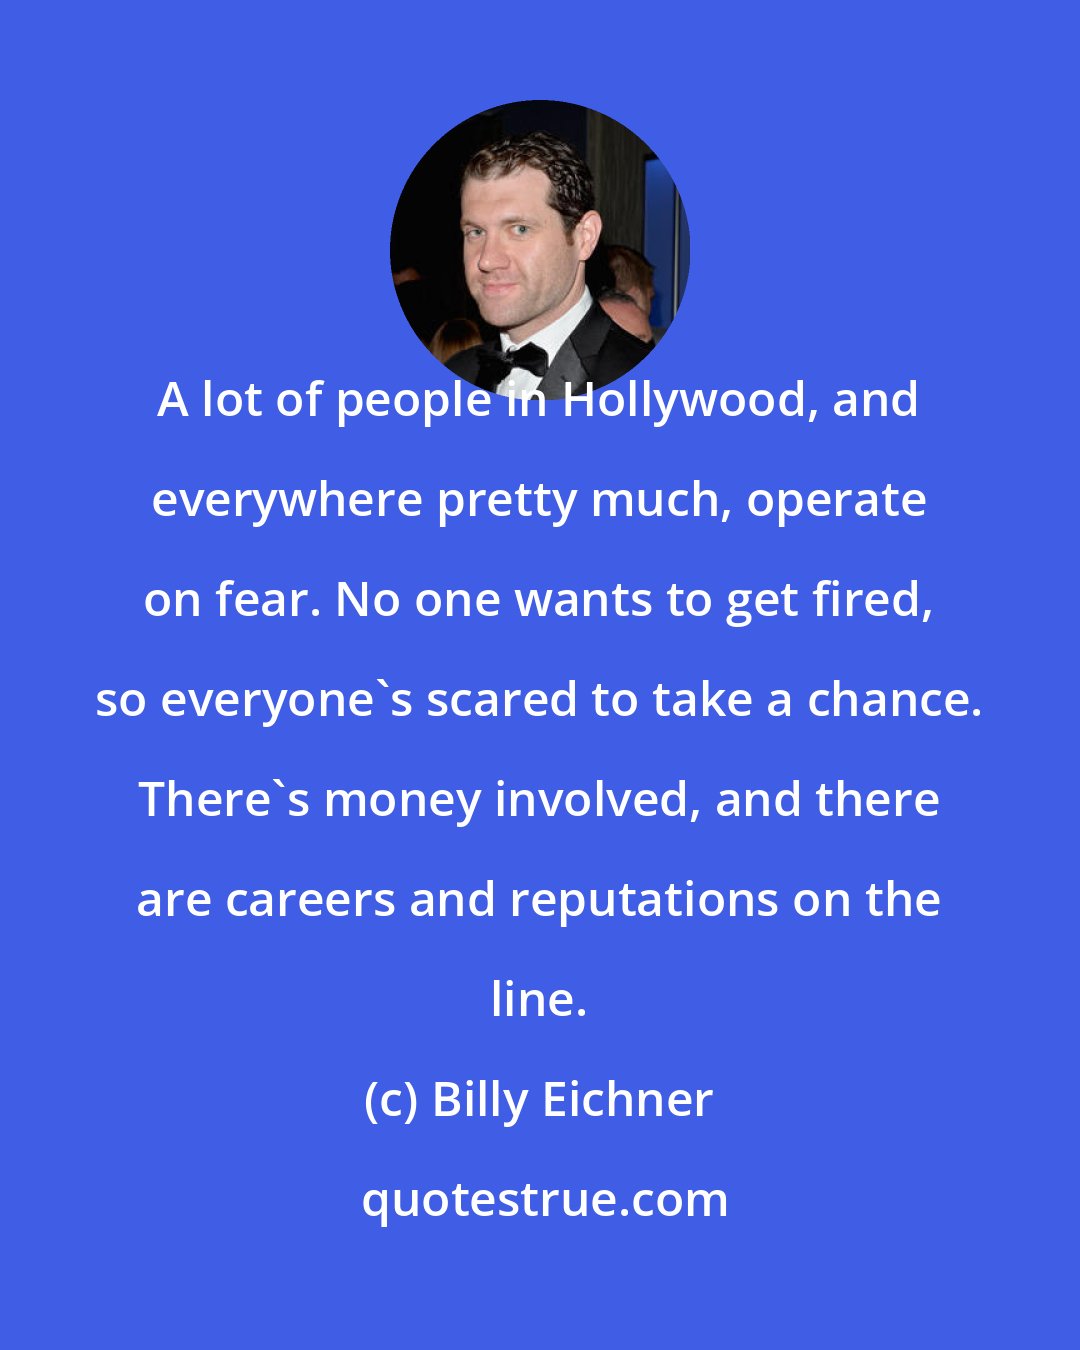 Billy Eichner: A lot of people in Hollywood, and everywhere pretty much, operate on fear. No one wants to get fired, so everyone's scared to take a chance. There's money involved, and there are careers and reputations on the line.